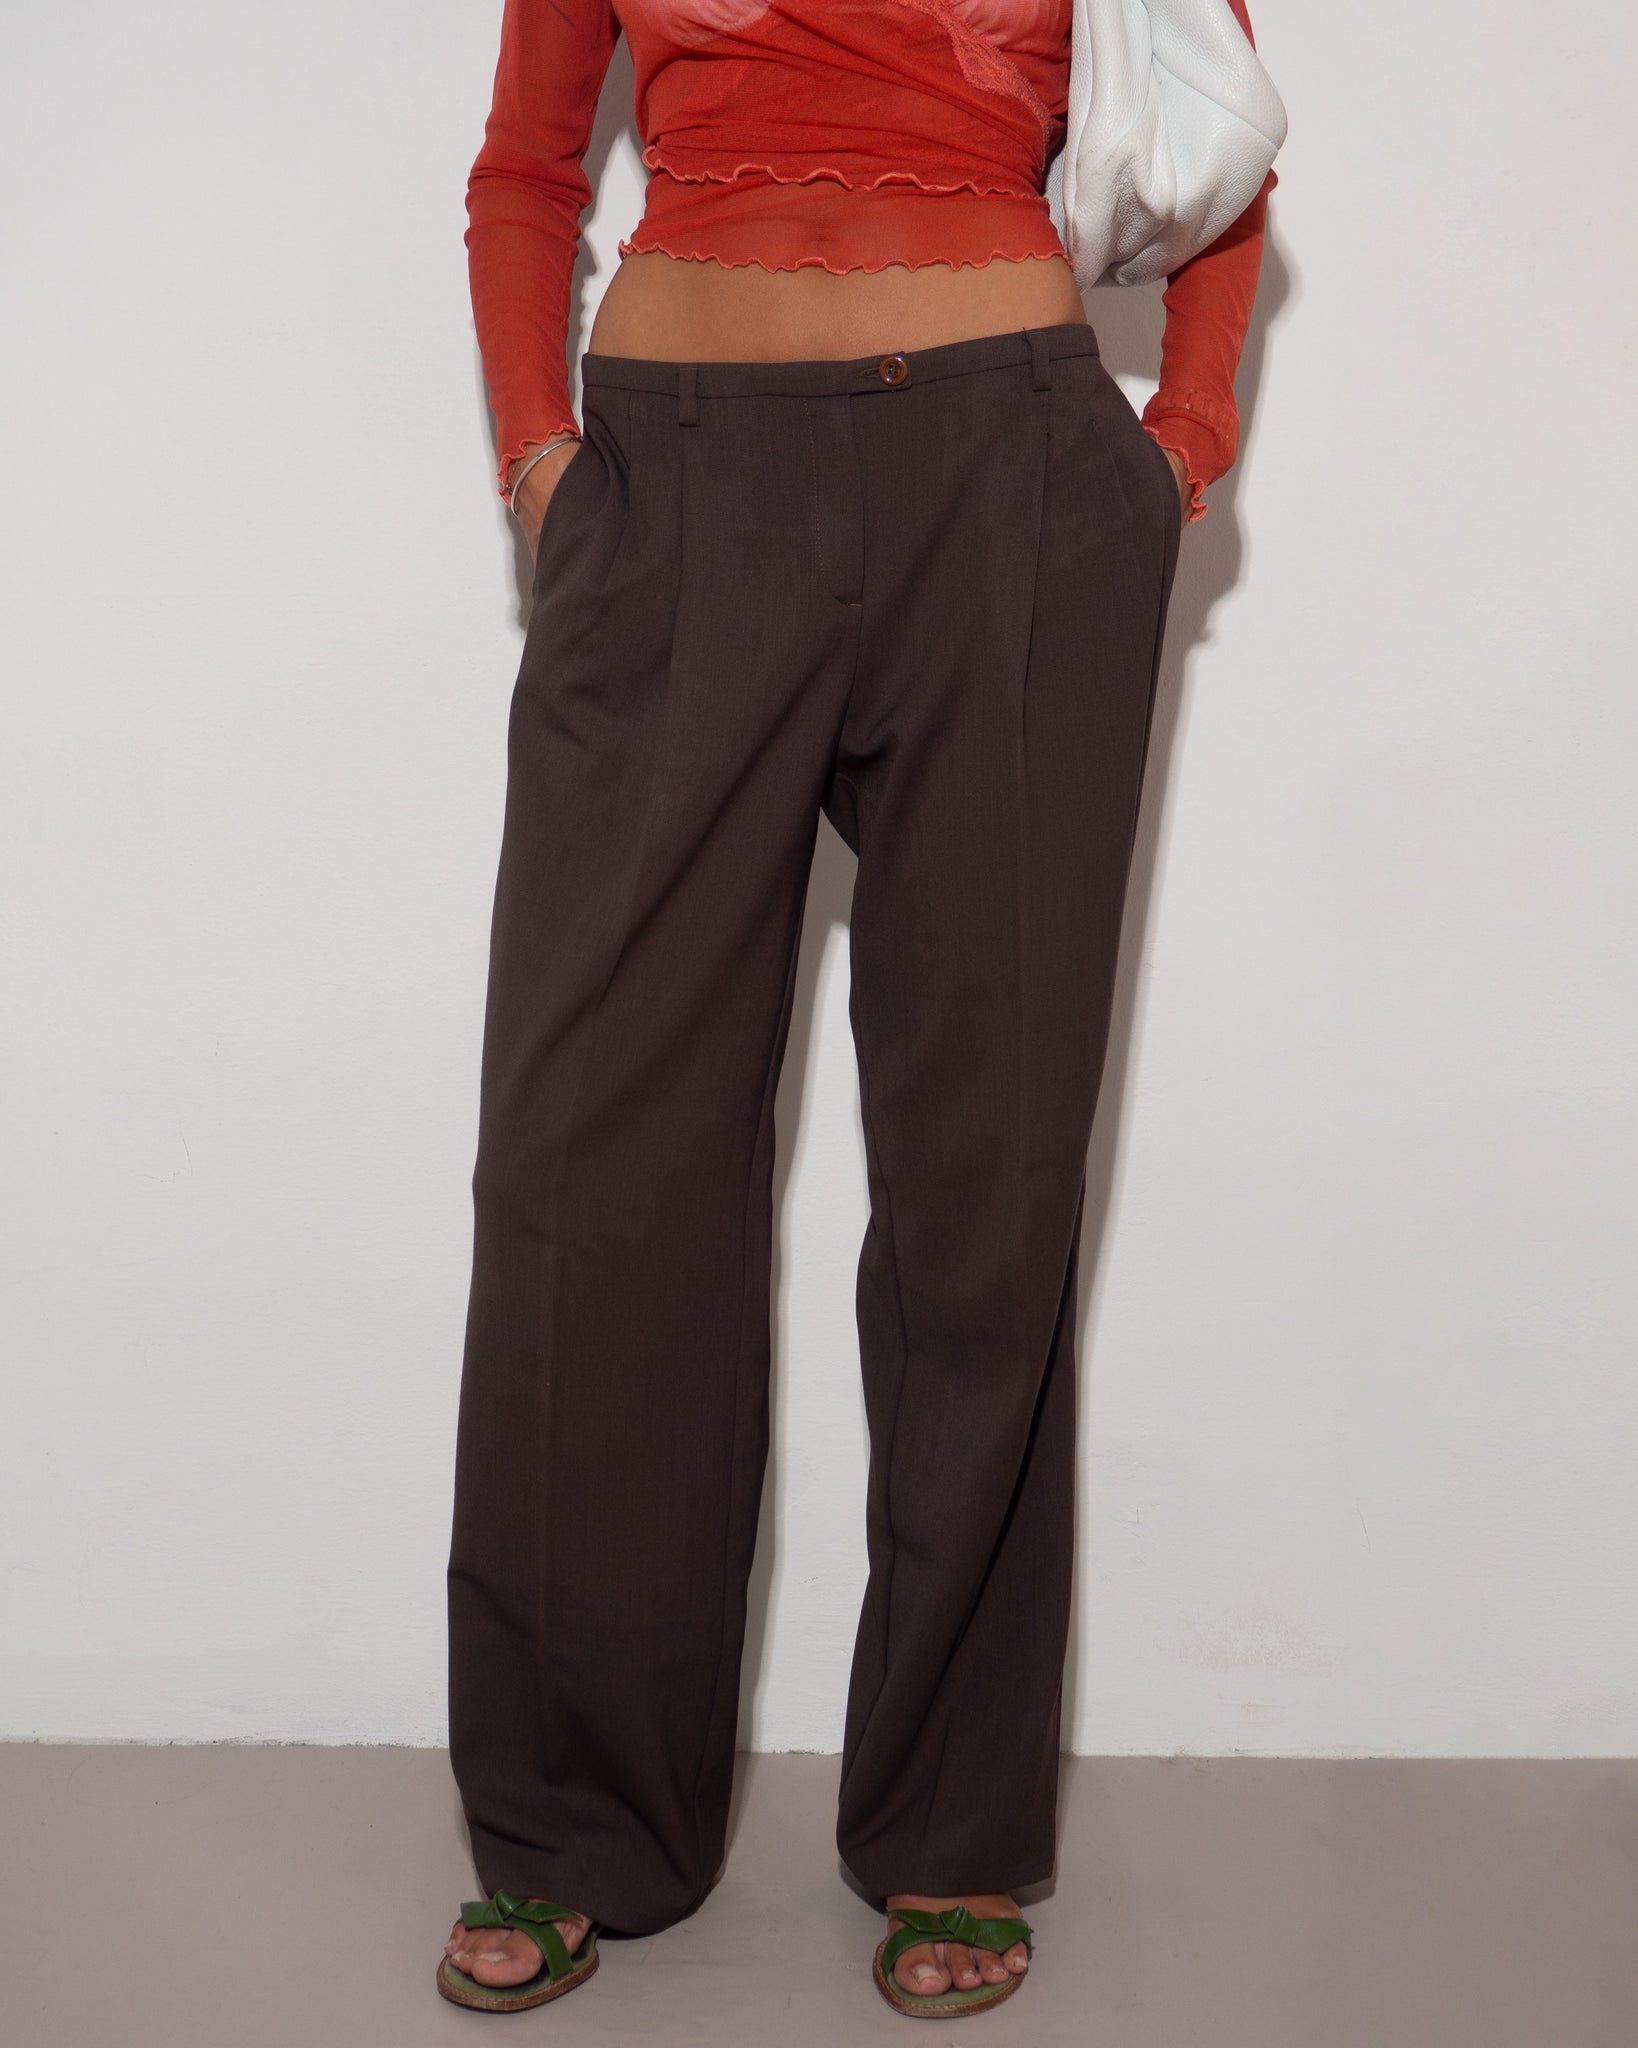 Moschino Pleated Pants